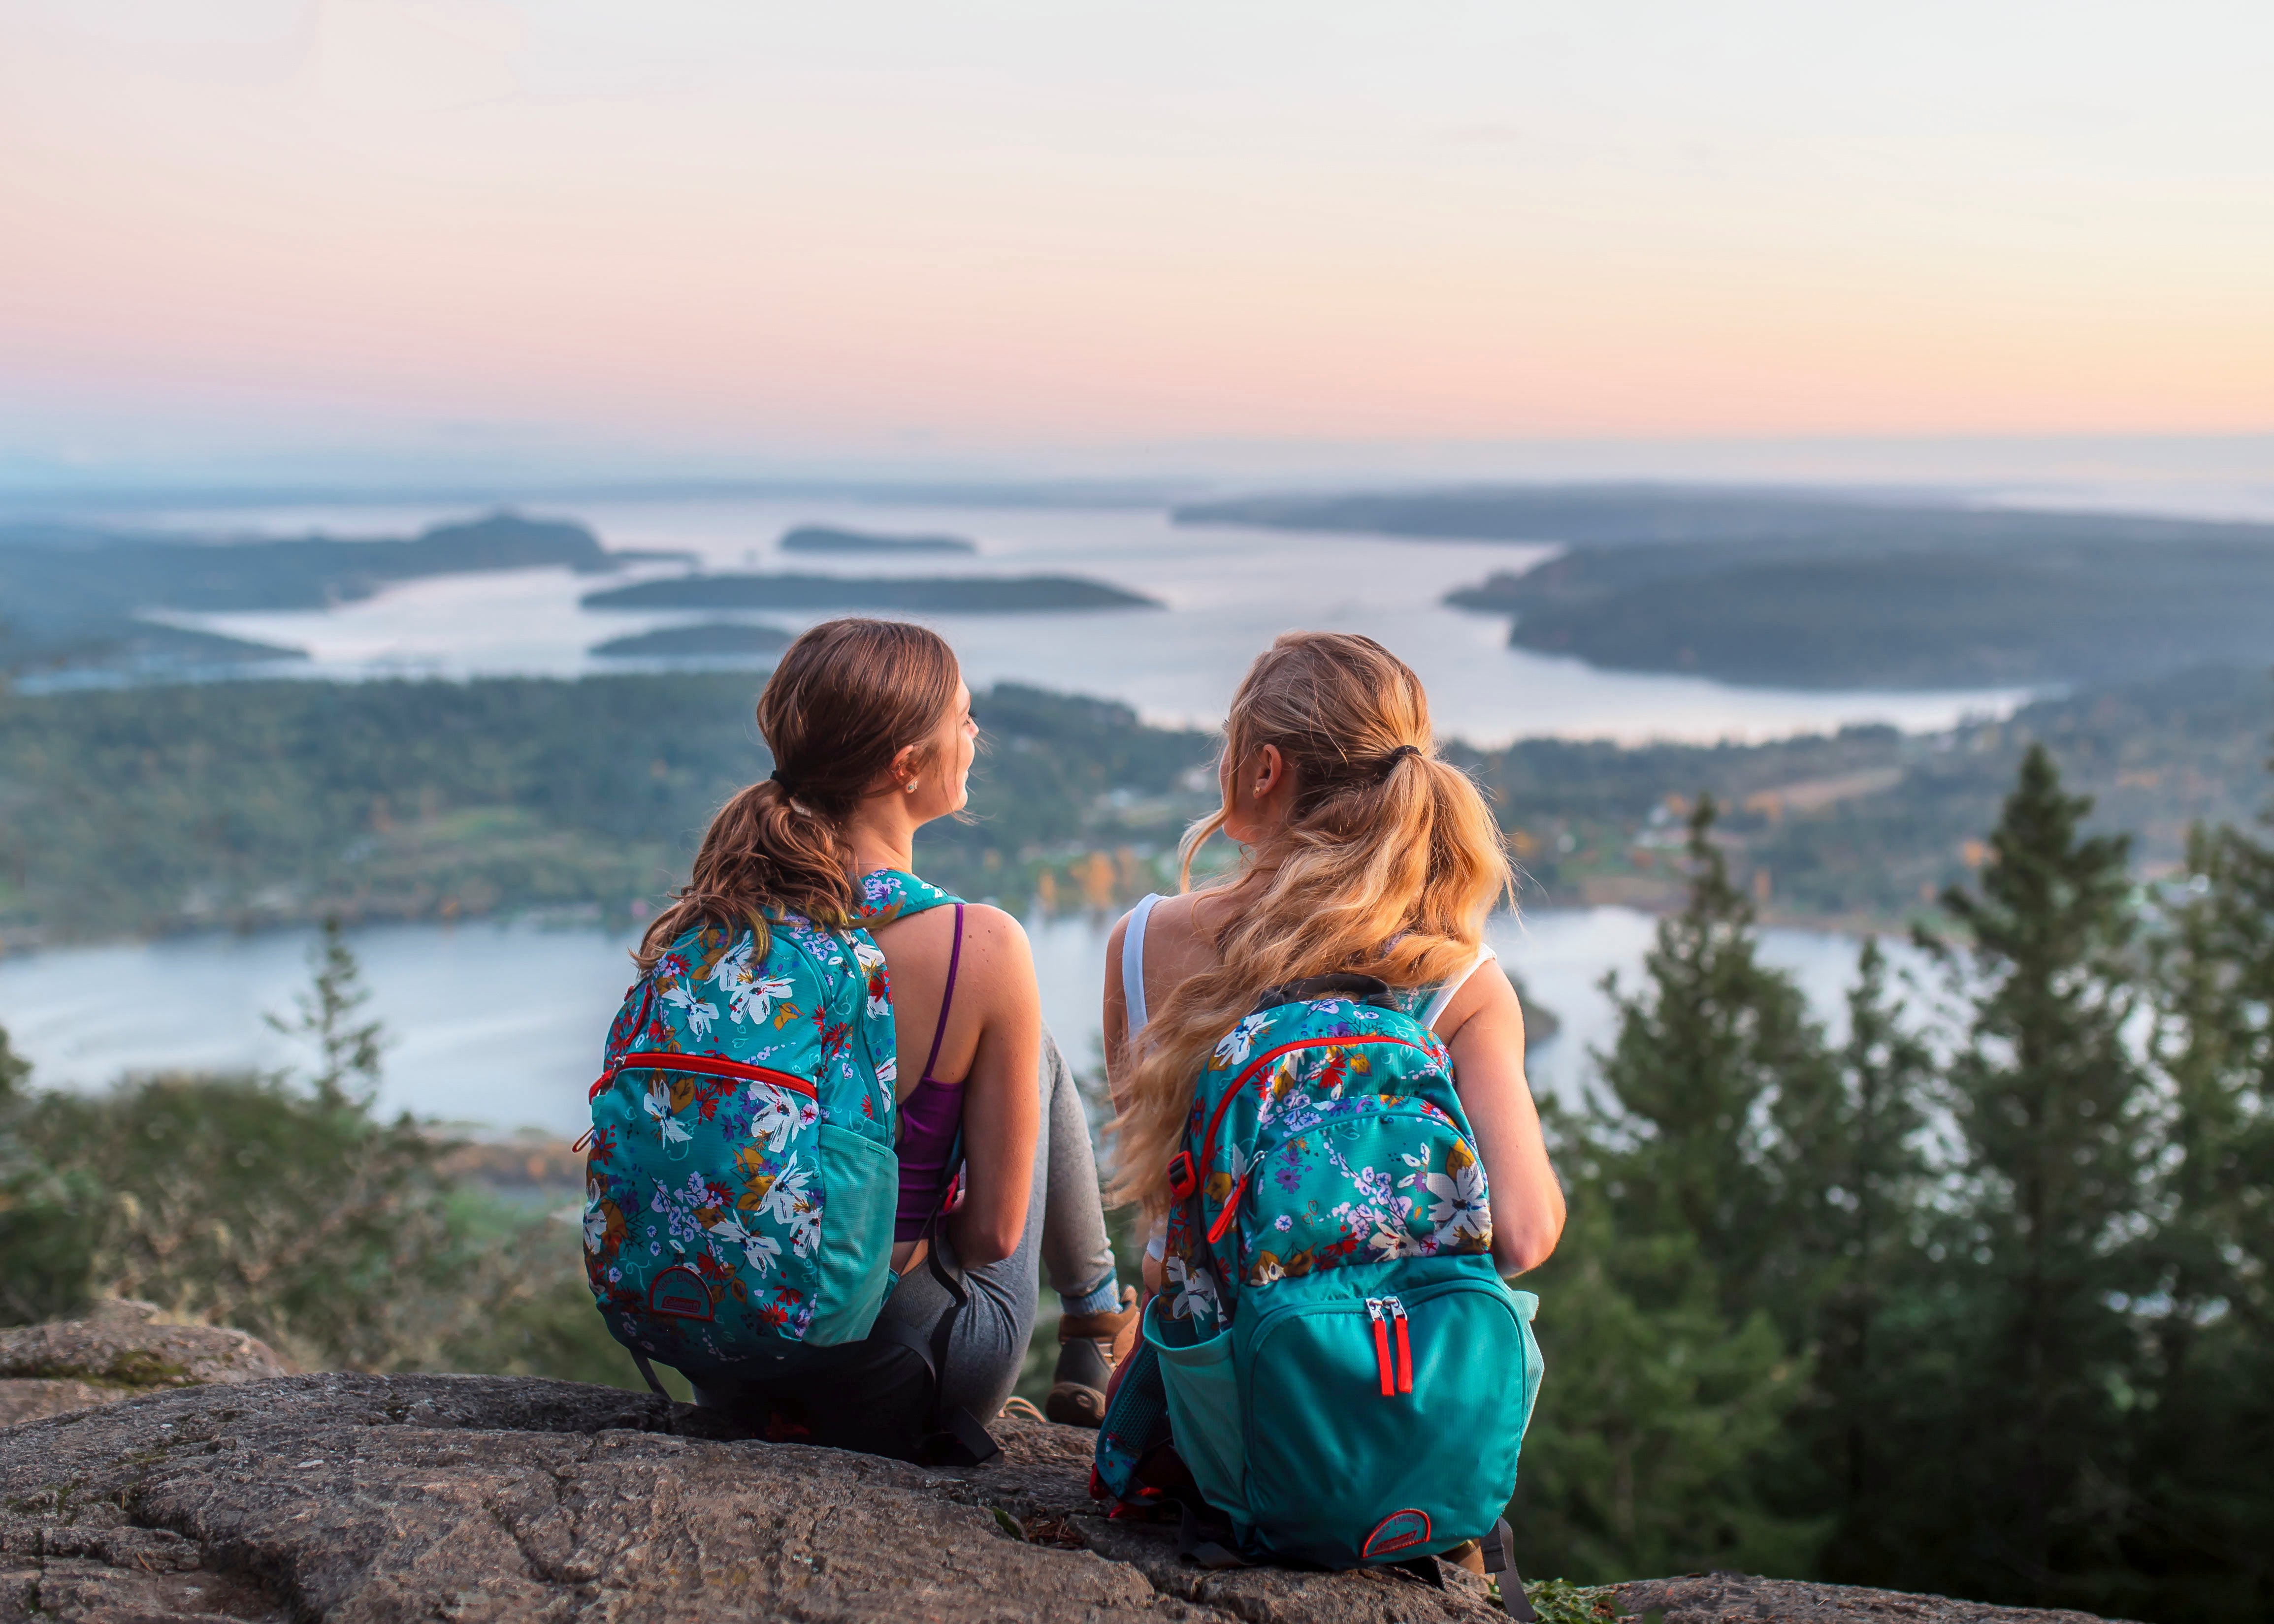 Two girls sitting with backpacks on